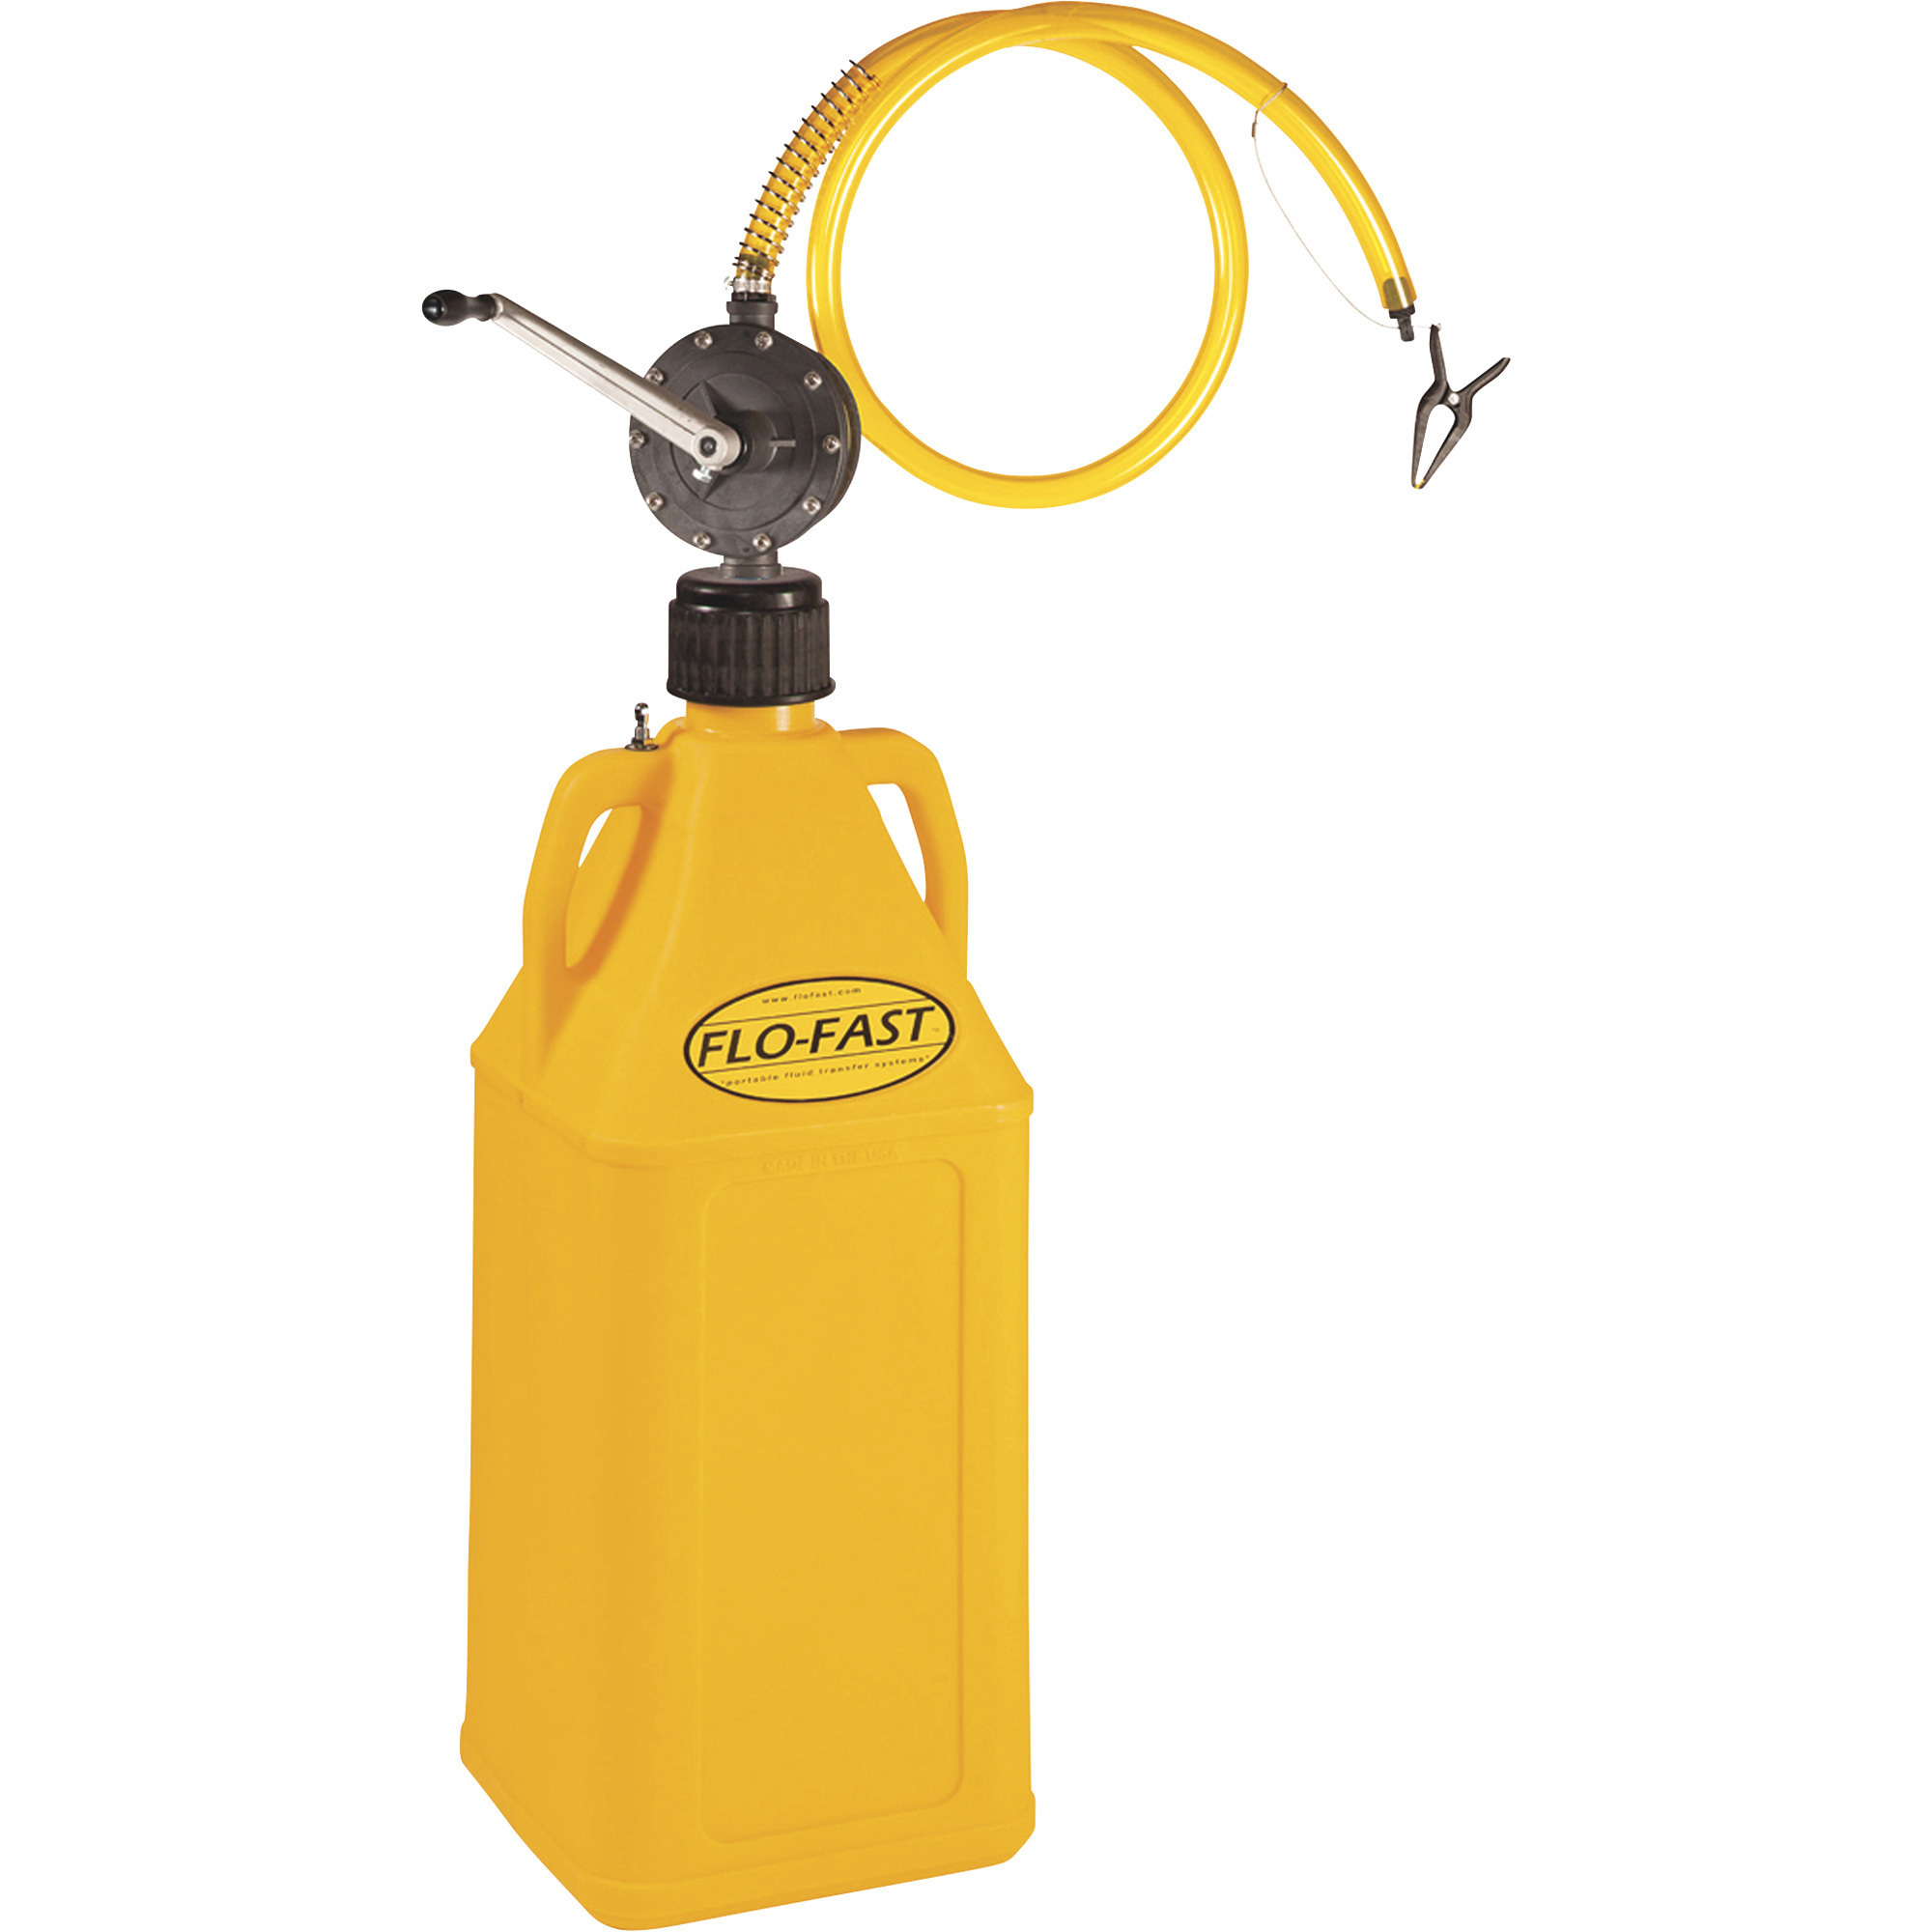 FLO-FAST Container With Pump, 10.5-Gallon, Yellow, For Diesel, Model 30050-Y